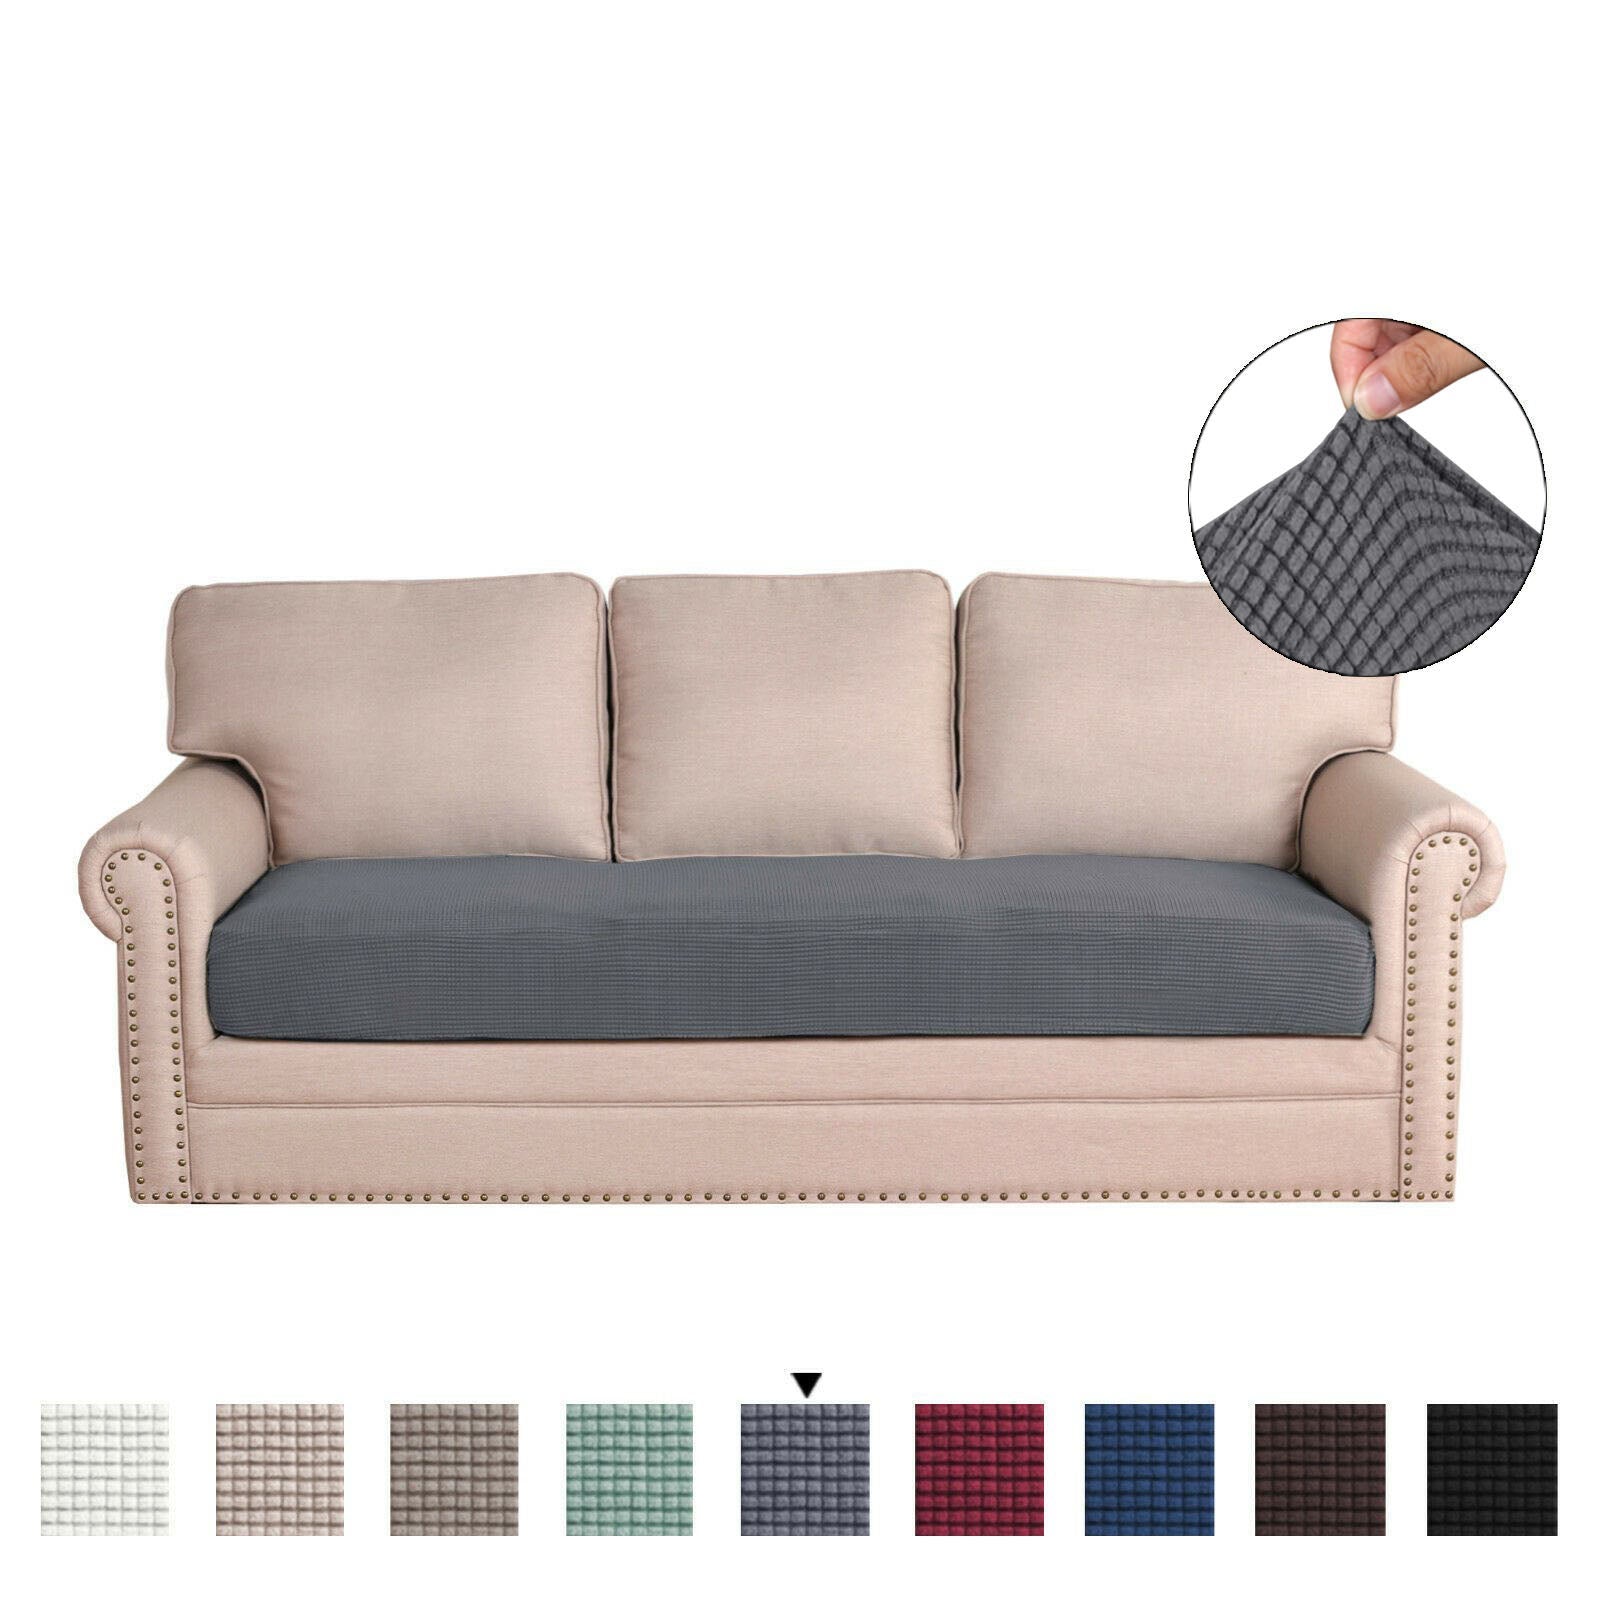 Souarts 1/2/3 Seater Sofa Cover Furniture Protector with Straps Sofa Covers Non-slip Stretch Couch Covers Elastic Sofa Slipcovers Settee Covers Armchair Cover Sofa Protector Washable Home Decor 